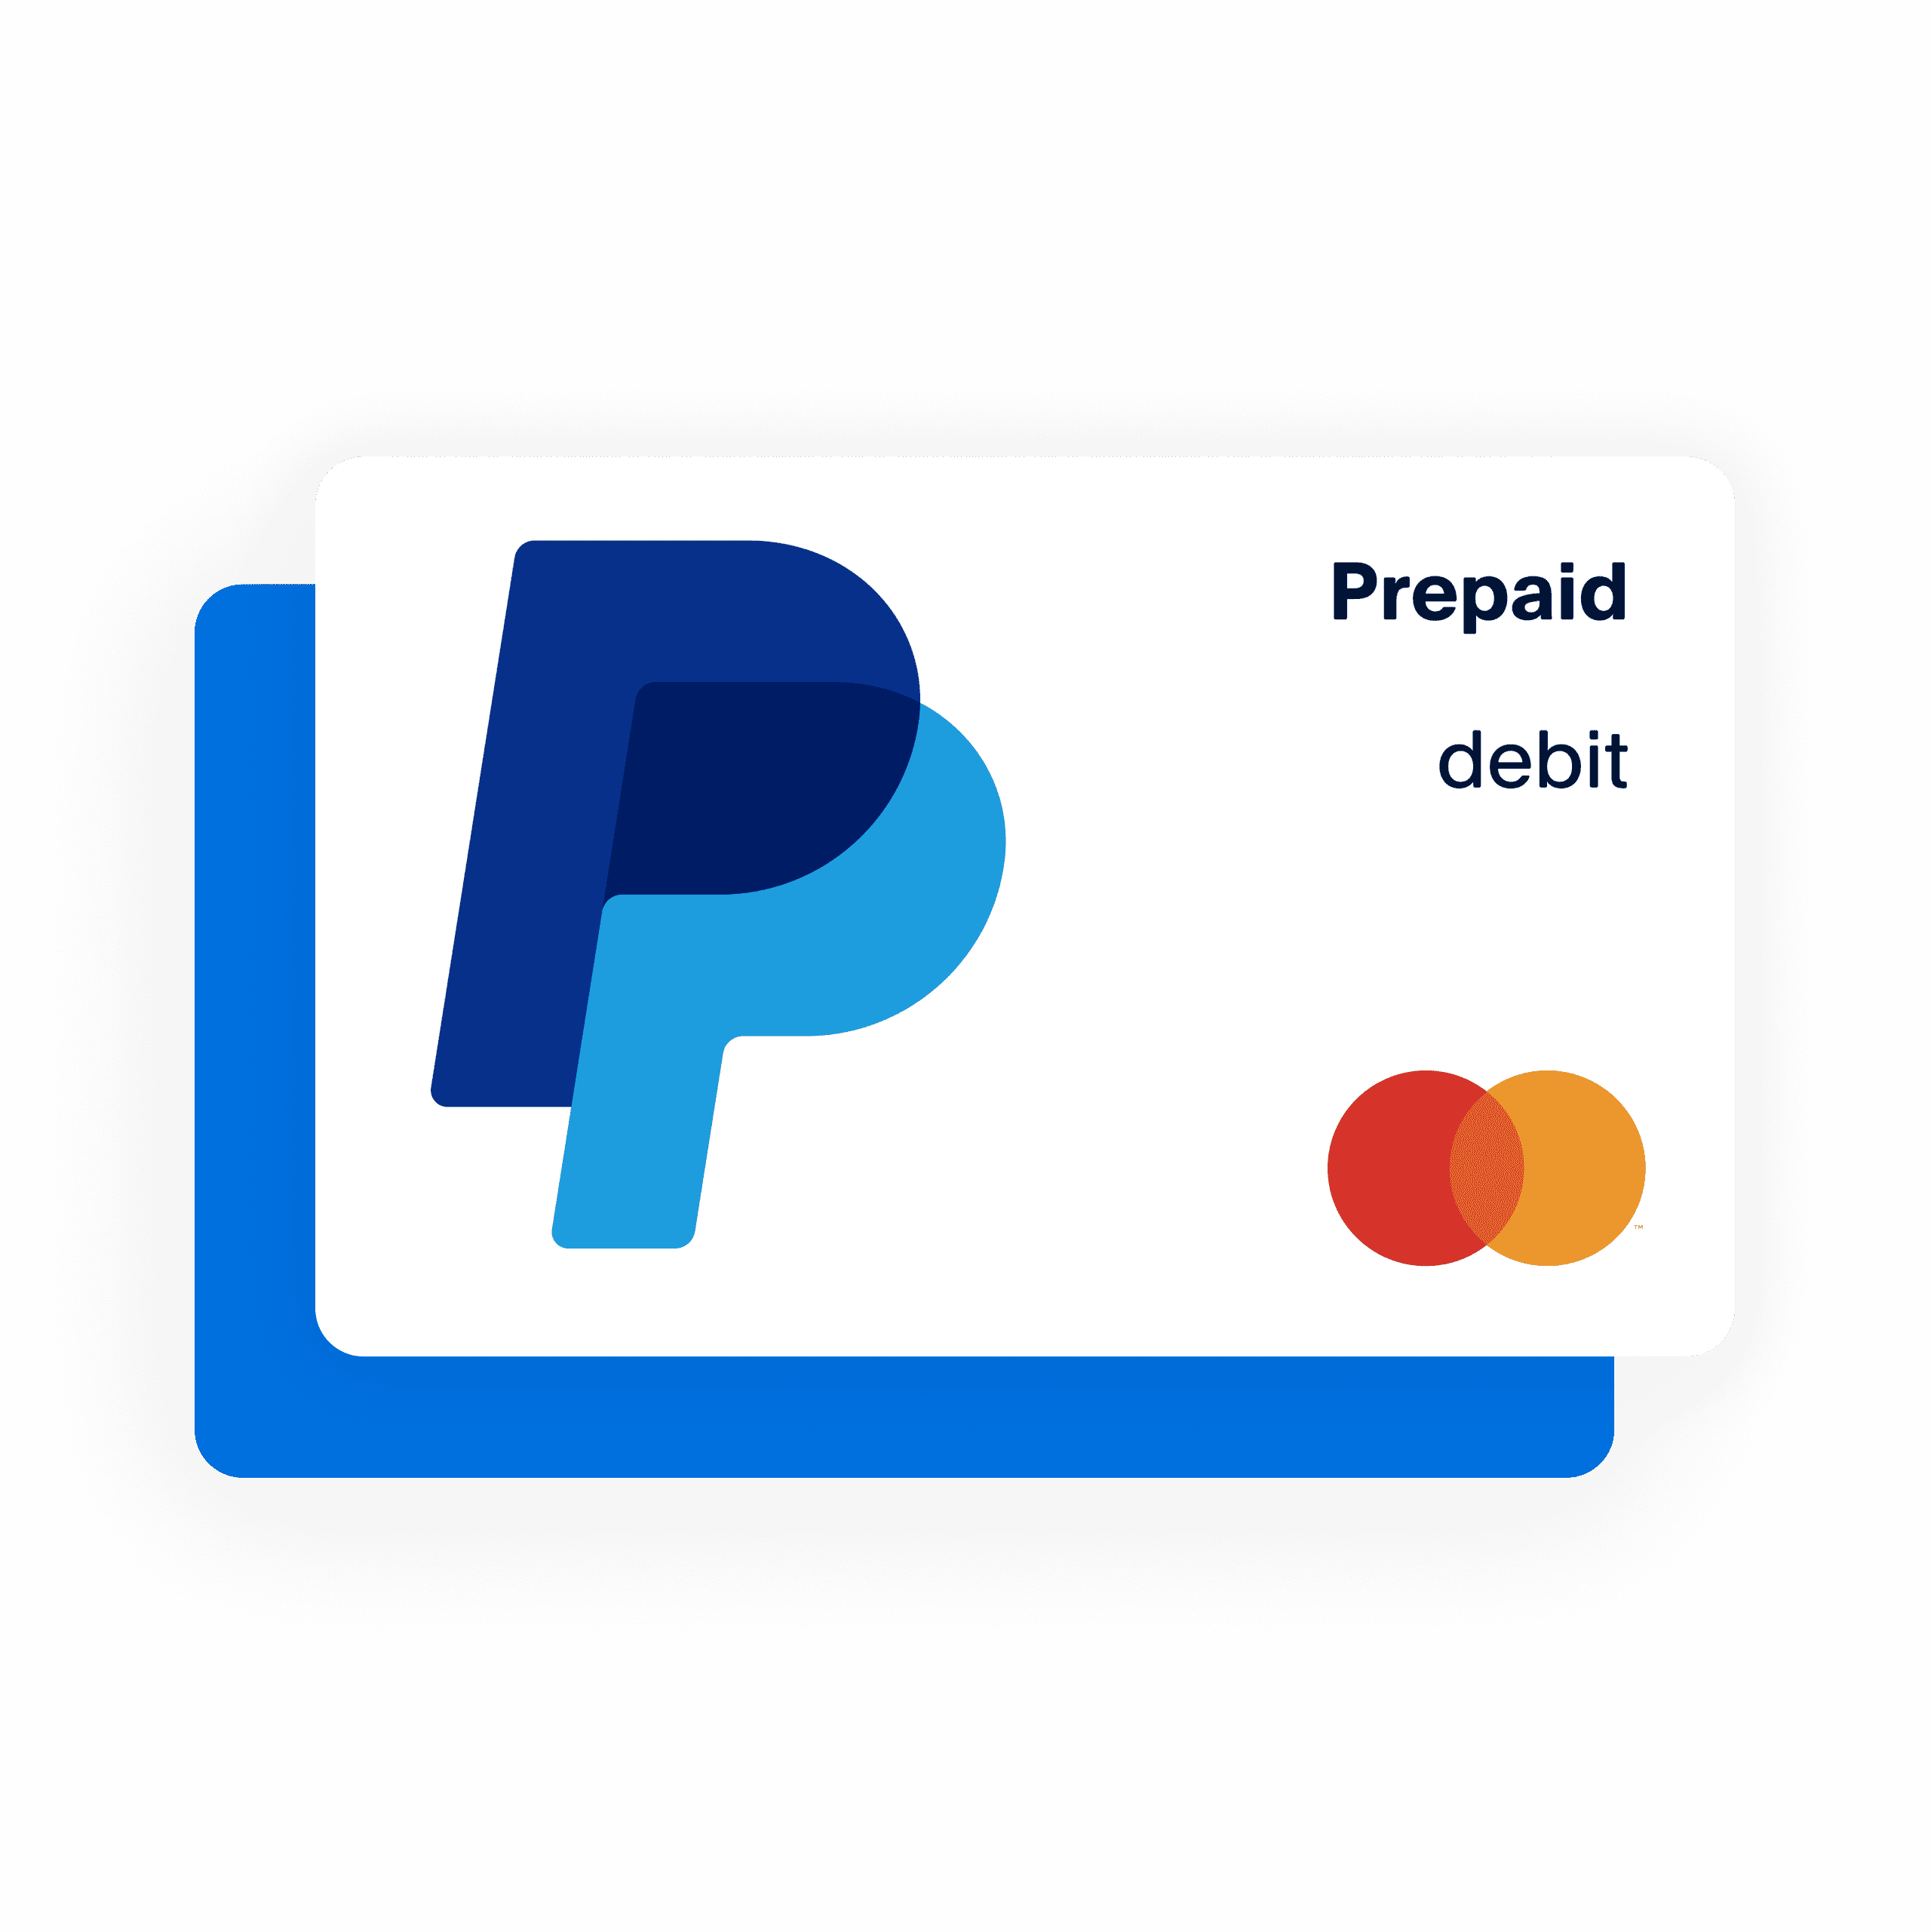 https://www.paypalobjects.com/marketing/web/US/en/rebrand/Shop-and-buy/Credit-and-cards/paypal-prepaid-debit-card.png